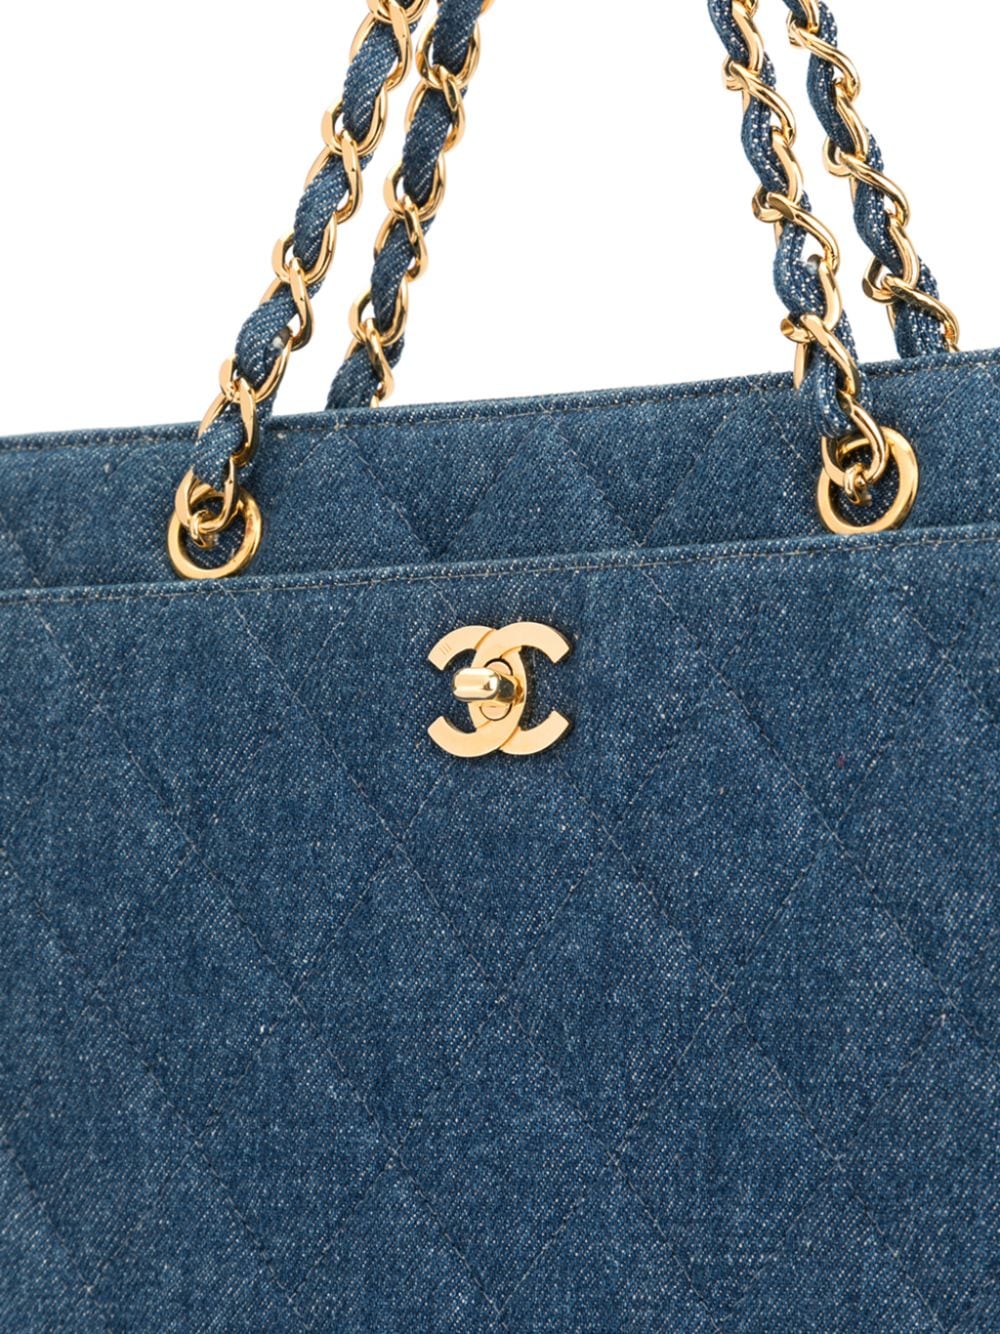 CHANEL Pre-Owned 1997-1999 CC Logos Quilted Denim Tote Bag - Farfetch